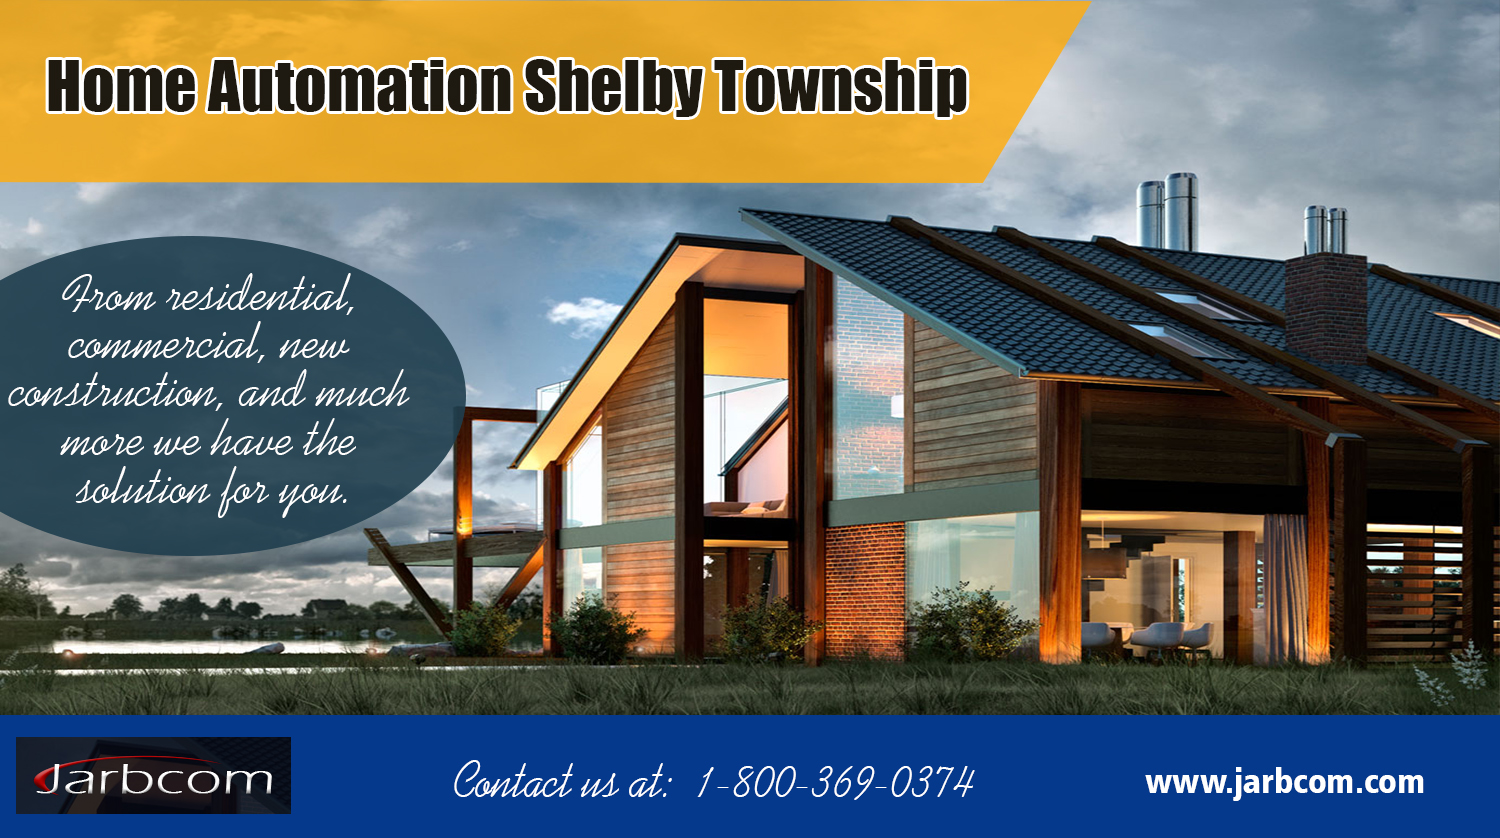 Home Automation Shelby Township